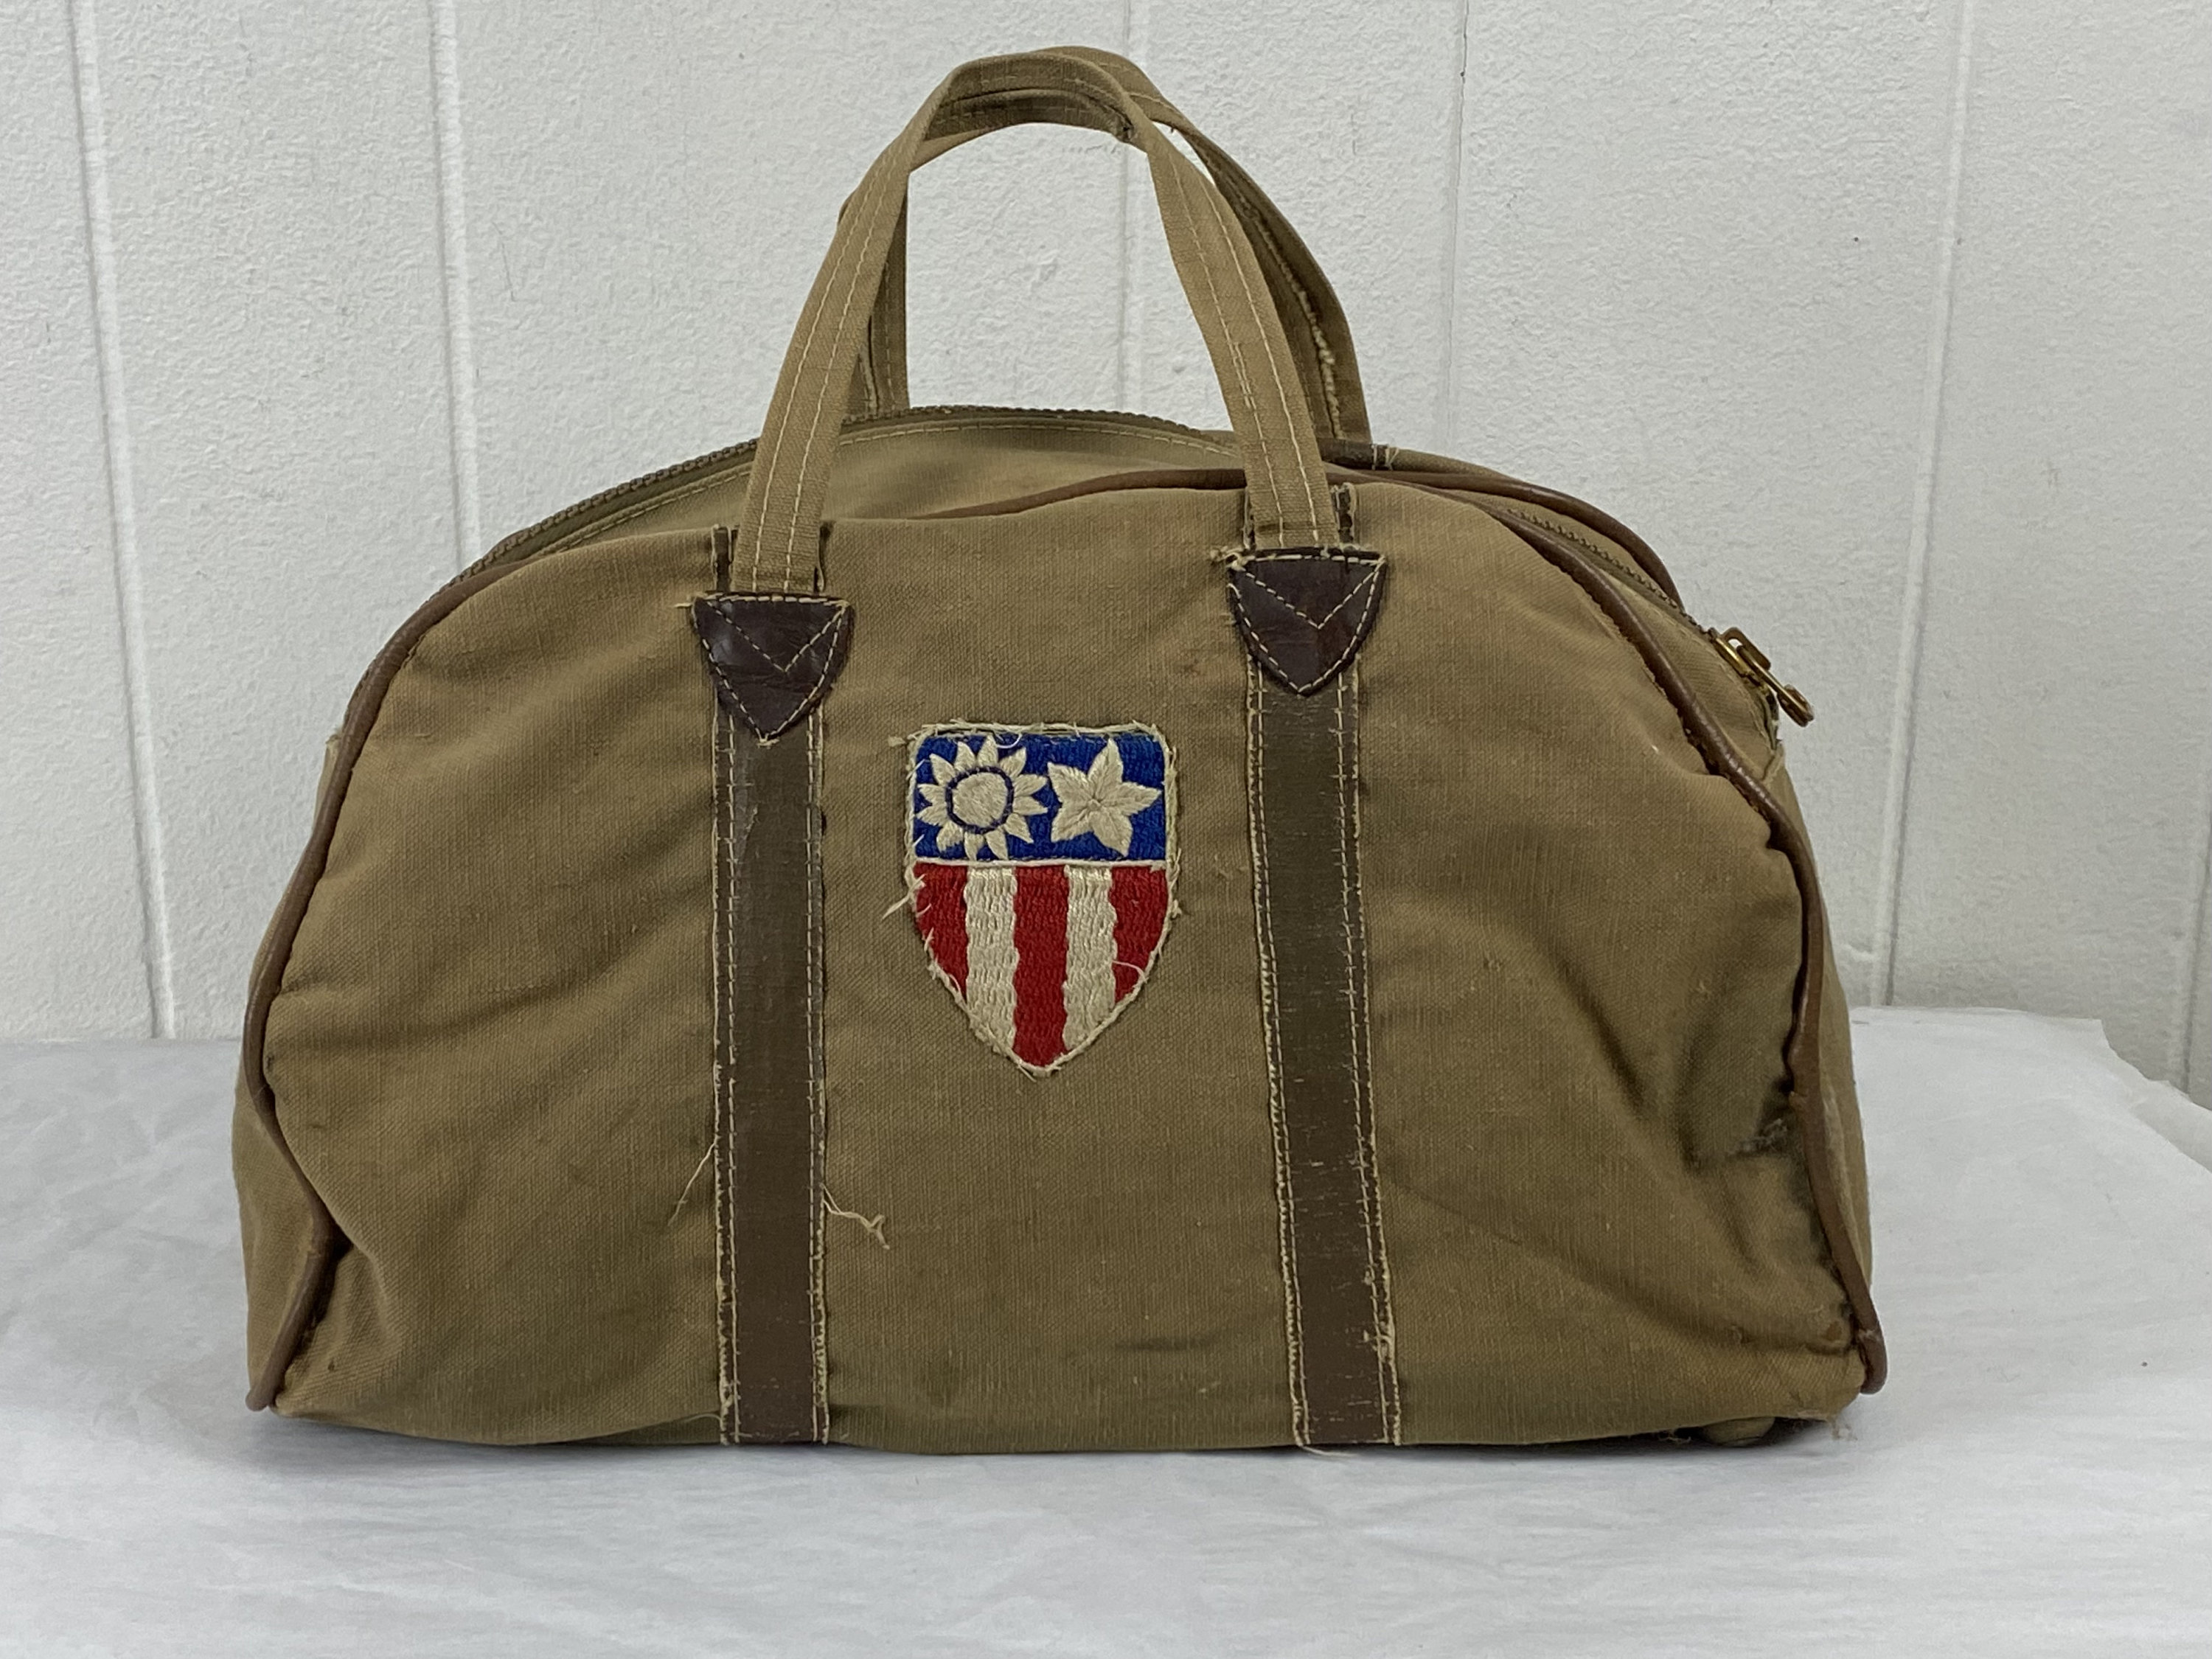 Top+Load+Military+Canvas+Duffle+Bag+Seabag+30+X+50+Army+Navy+Marines for  sale online